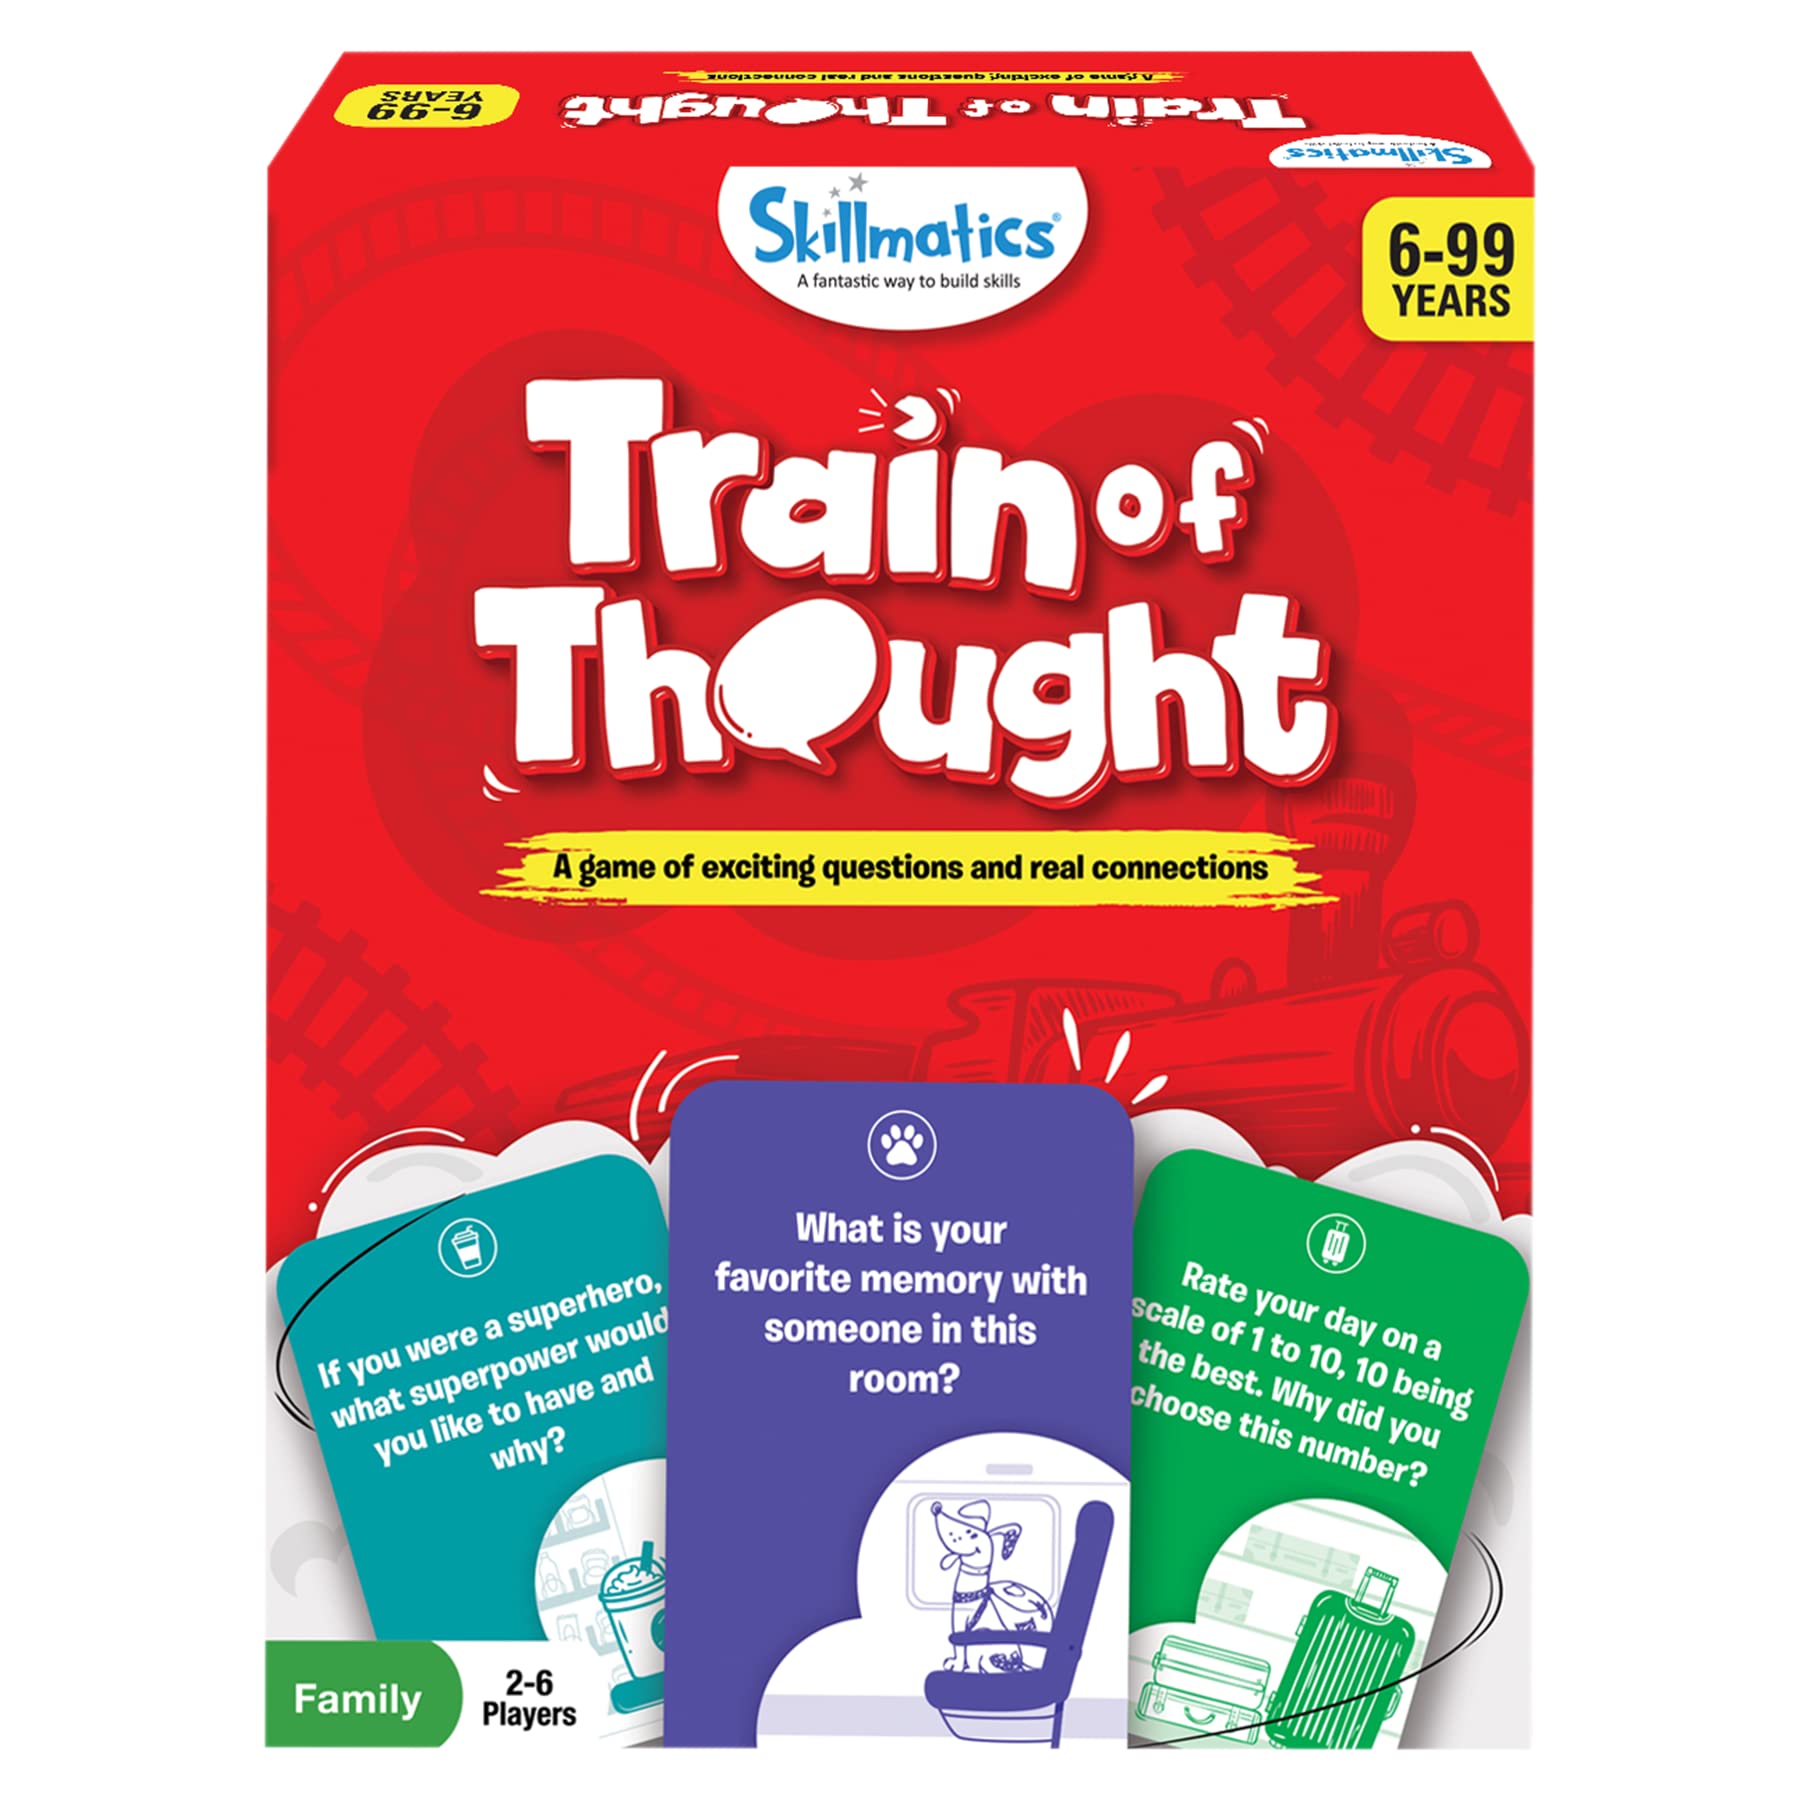 Skillmatics - Guess in 10 Animal Planet + Train of Thought (Ages 6-99) Bundle | Card Games for Kids